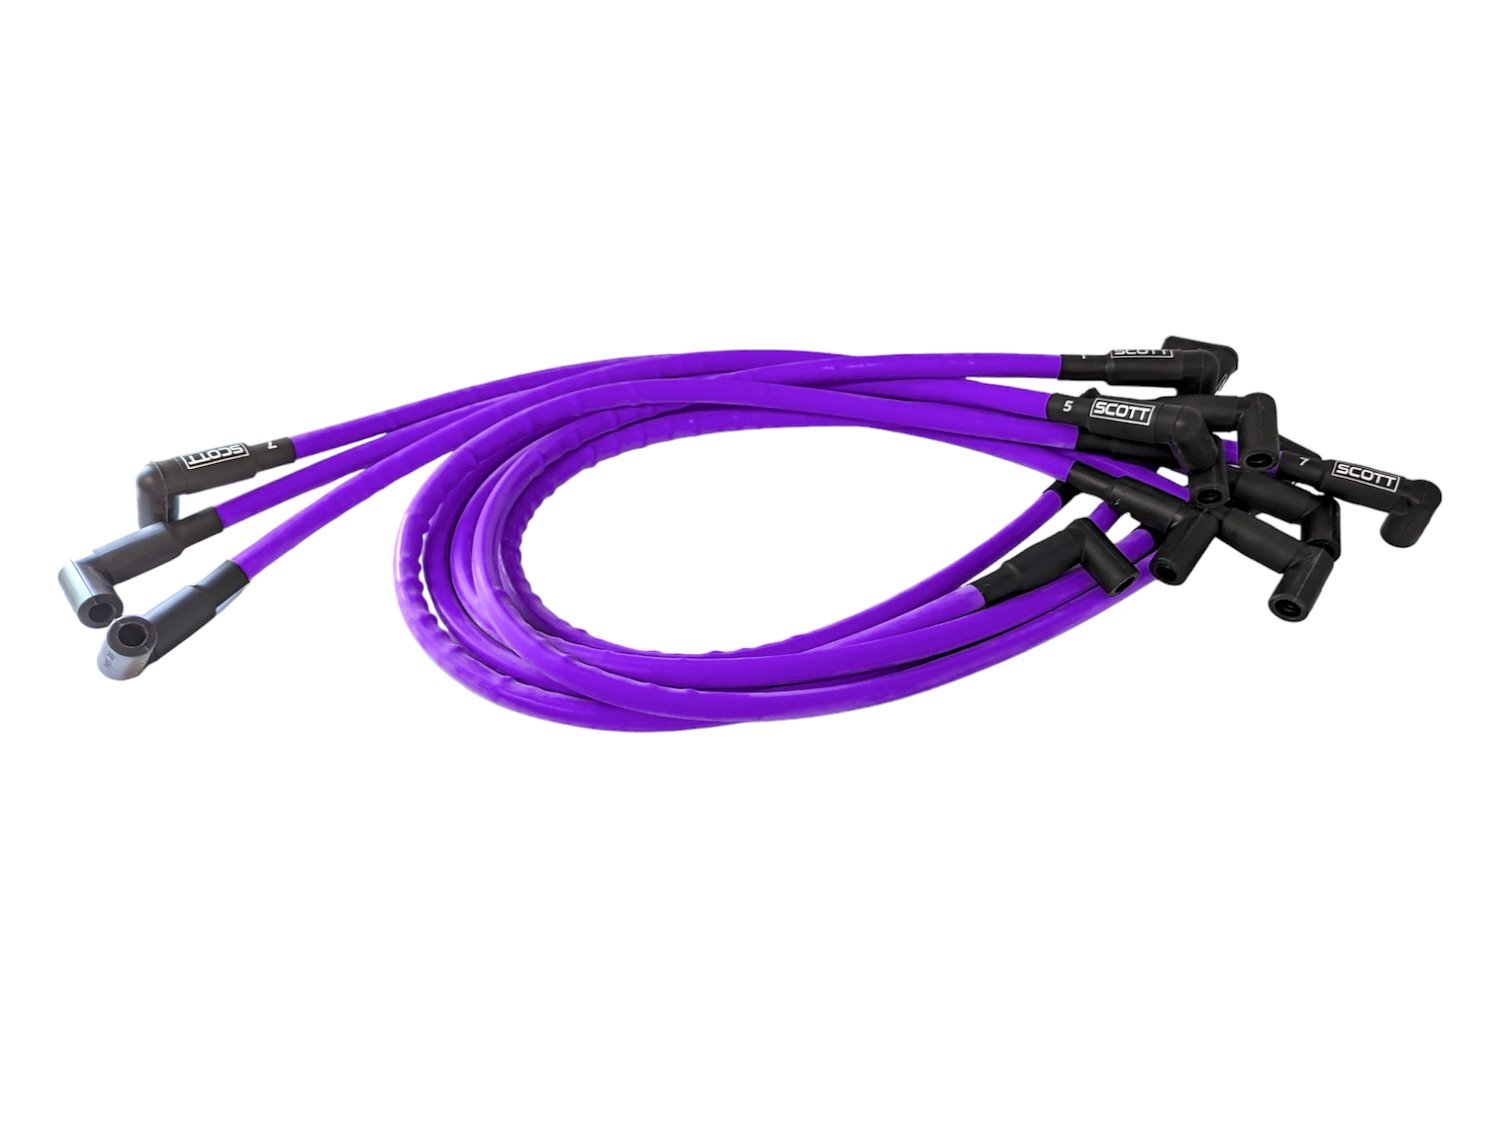 SPW-CH-530-6 High-Performance Silicone-Sleeved Spark Plug Wire Set for Big Block Ford, Under Header [Purple]